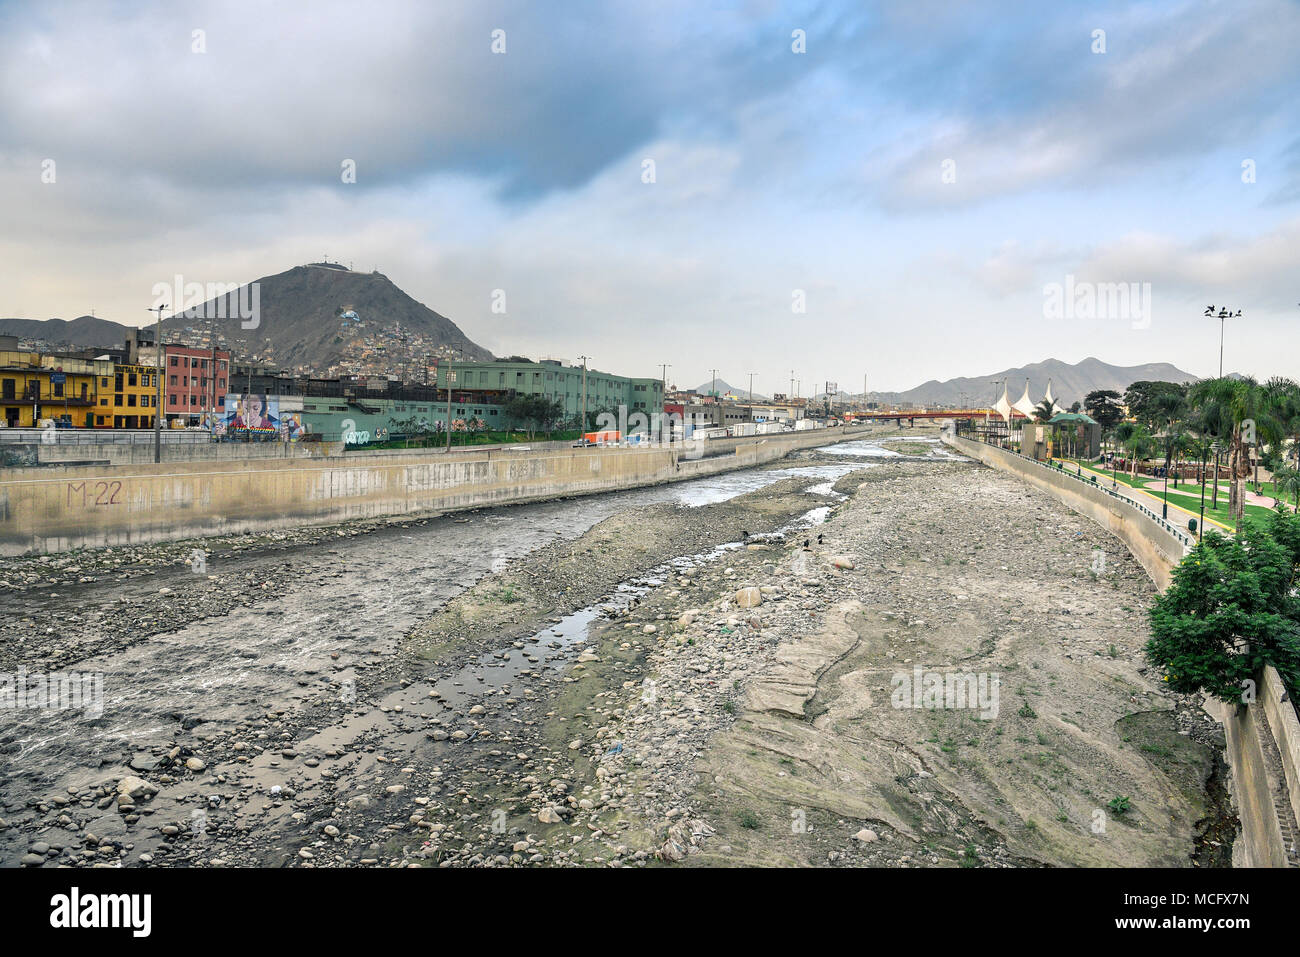 Lima / Peru - 07.18.2017: Dry and dirty bottom of the Rimac river in downtown. Stock Photo